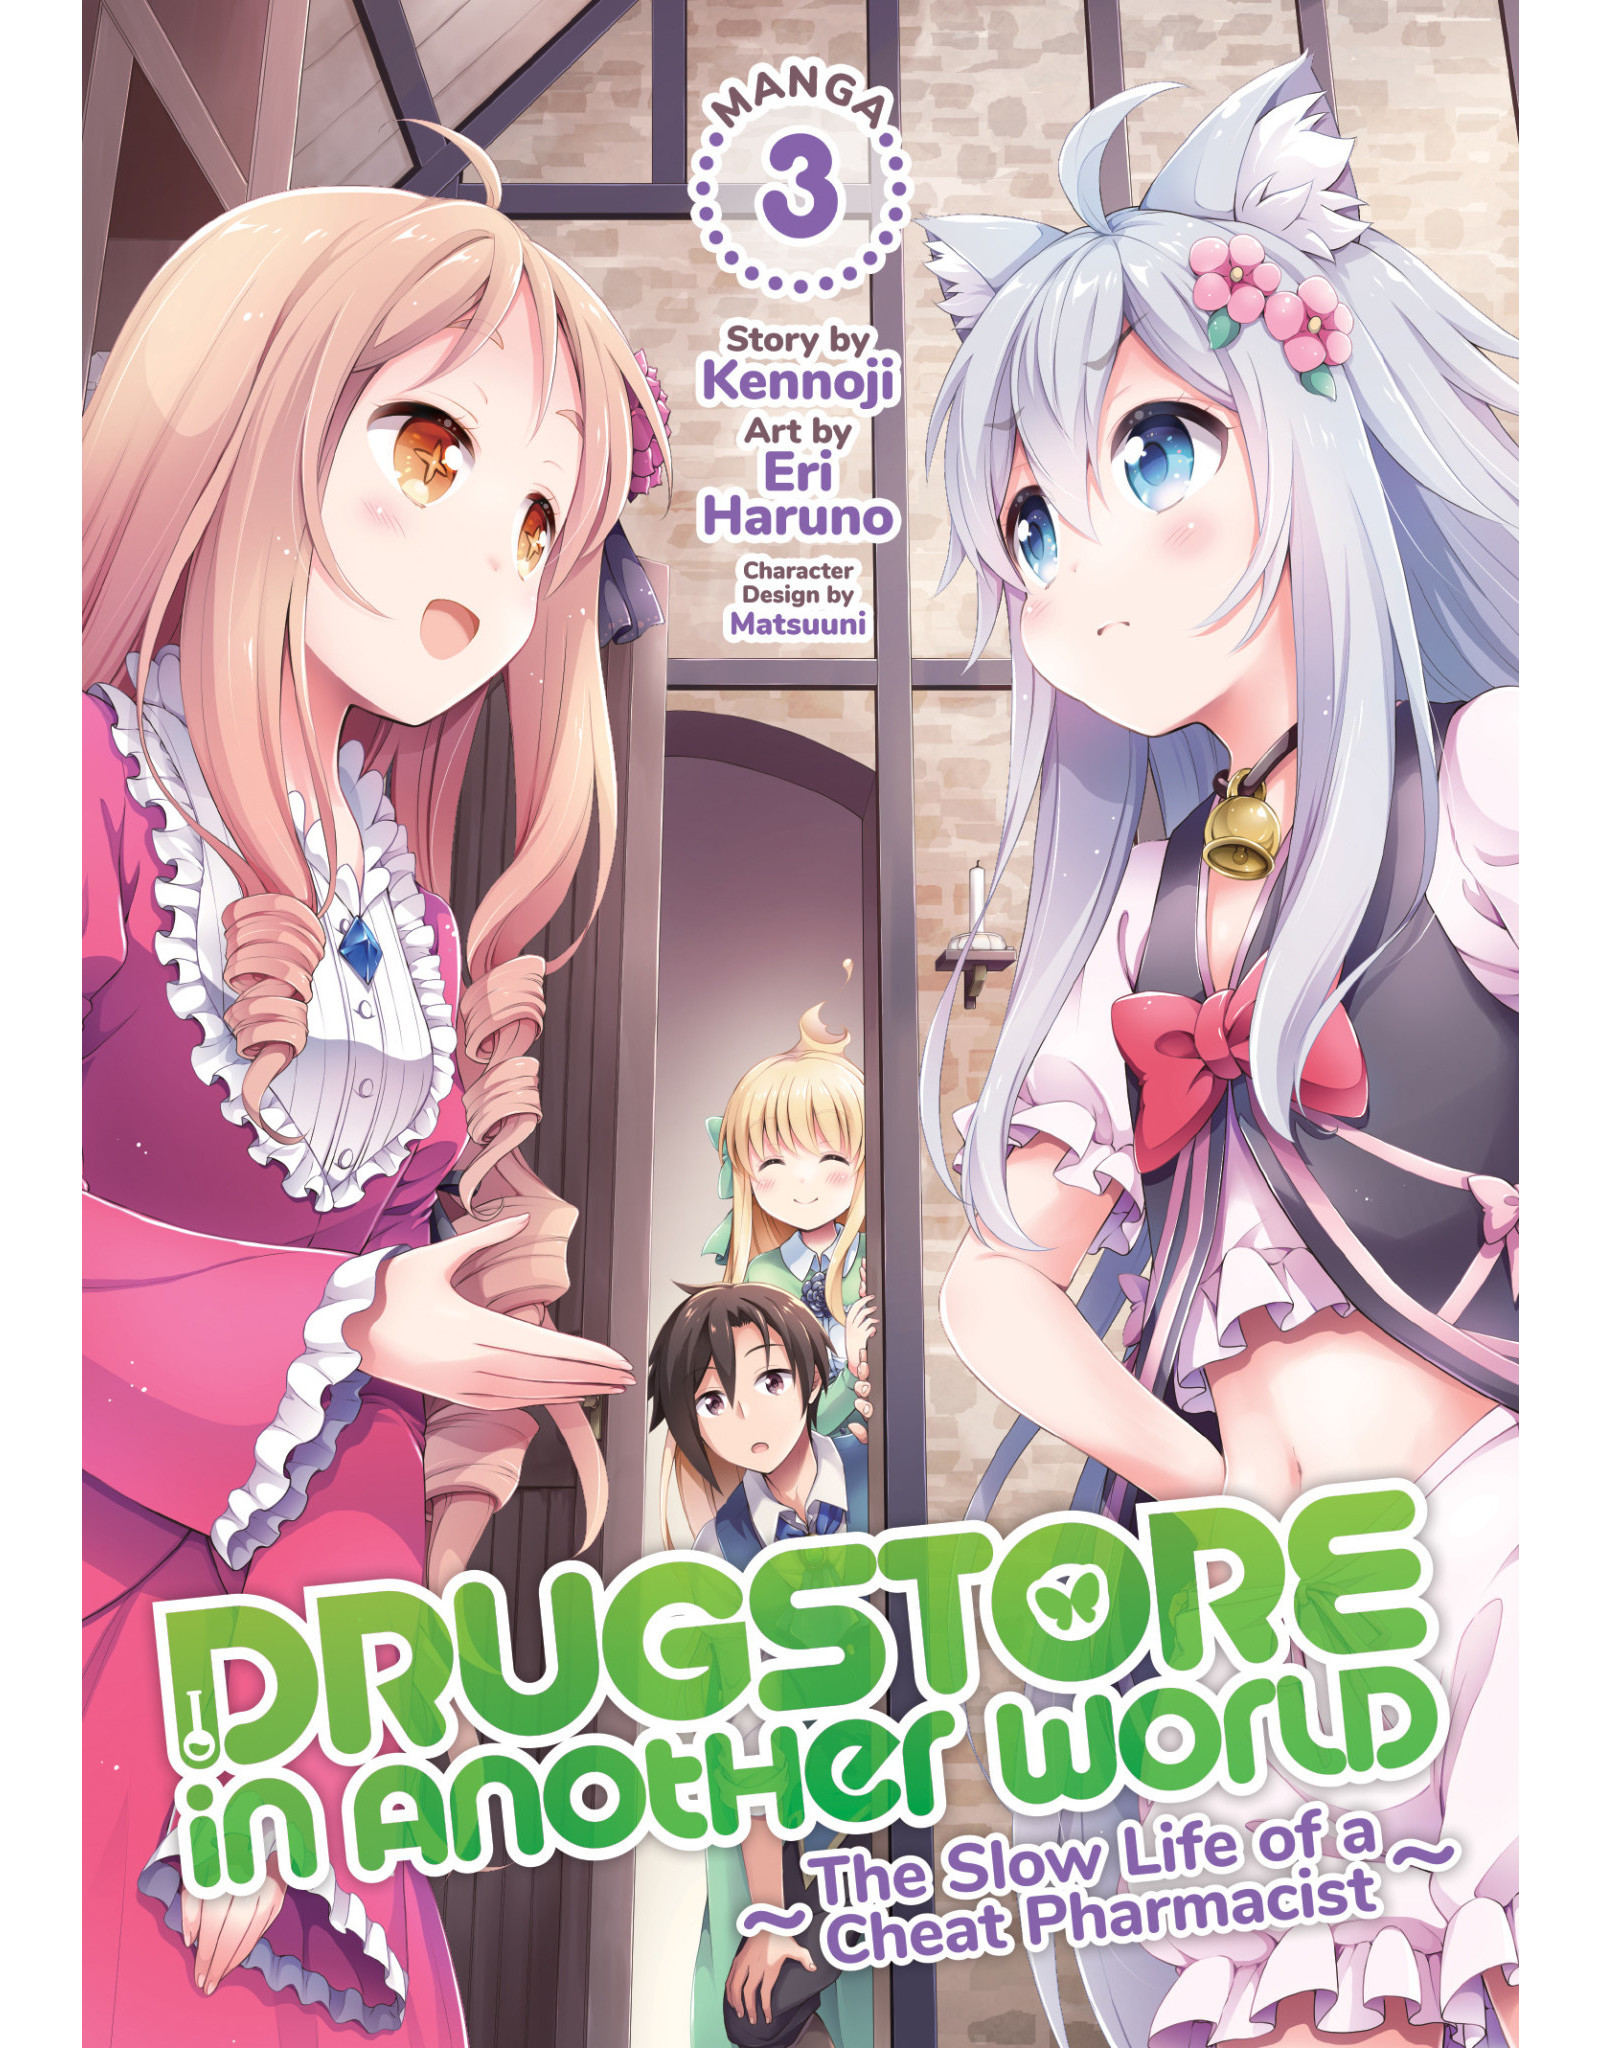 Drugstore in Another World: The Slow Life of a Cheat Pharmacist 03 (Engelstalig) - Manga